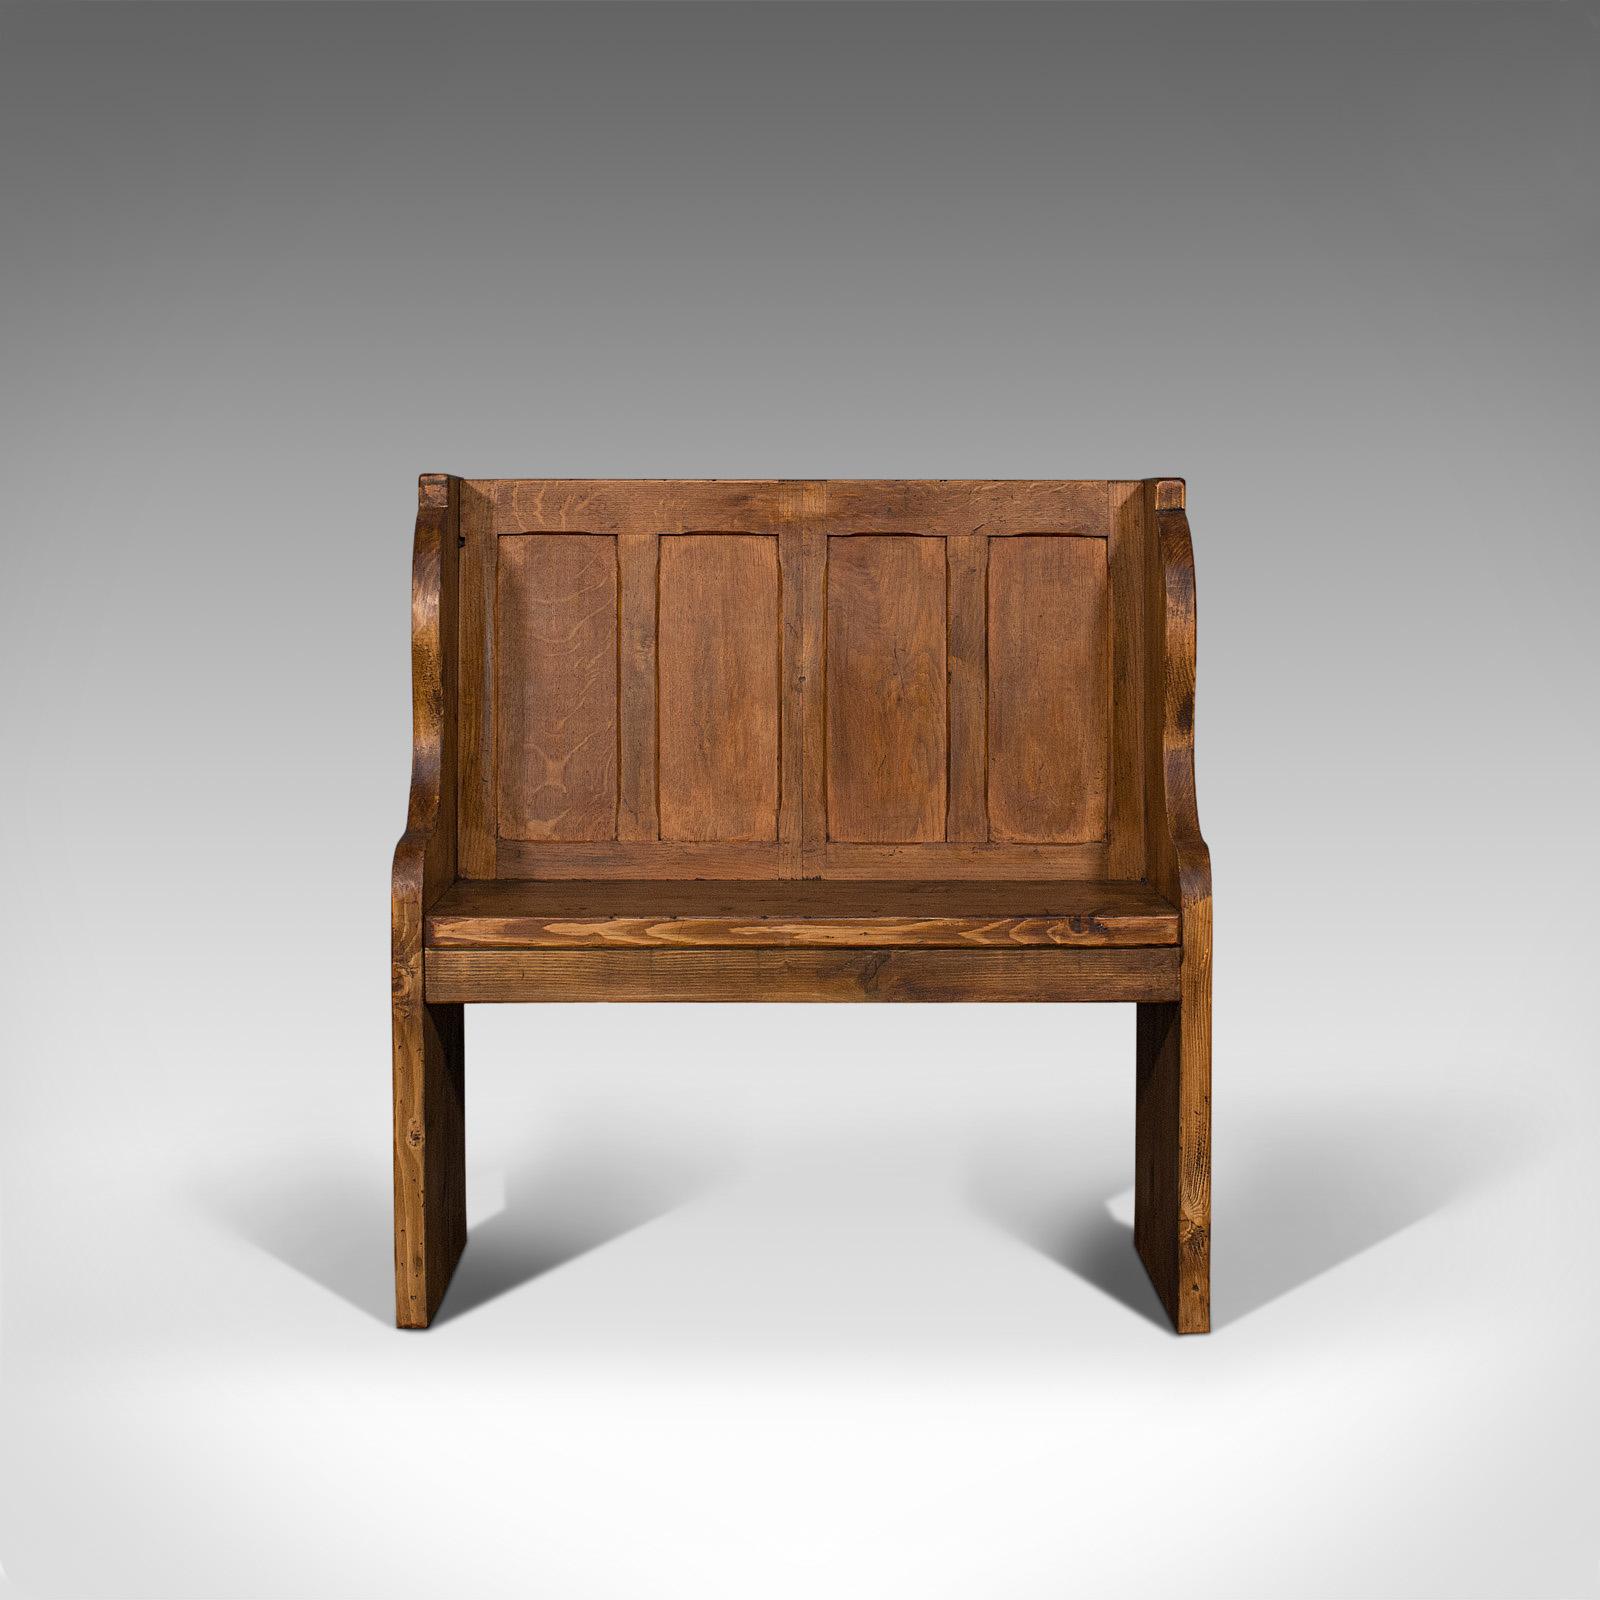 This is an antique two-seat settle. An English, oak and pine ecclesiastical pew or bench, dating to the late Victorian period, circa 1900.

Mellow tones and attractive form
Displays a desirable aged patina
Select oak and pine offers fine grain